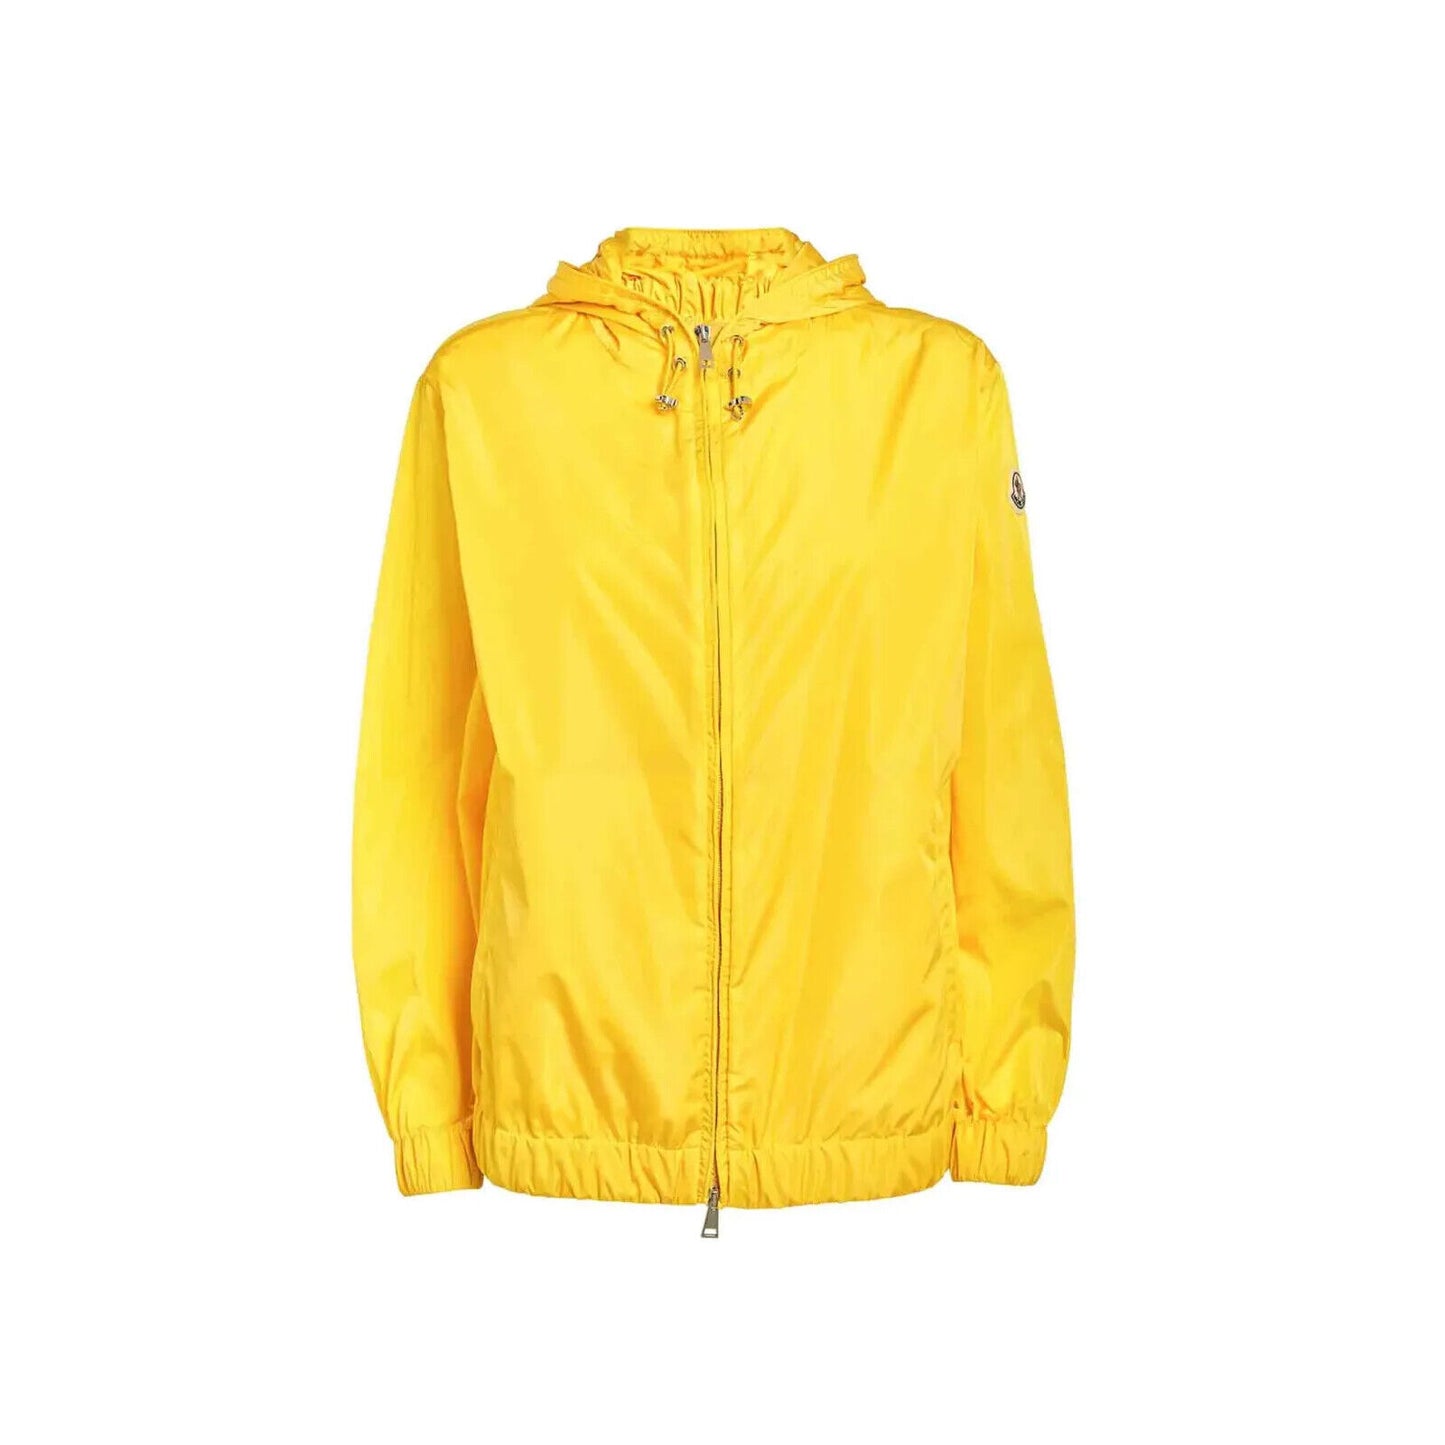 Moncler Womens Cecile Hooded Jacket in Yellow RRP £520.00 BNWT